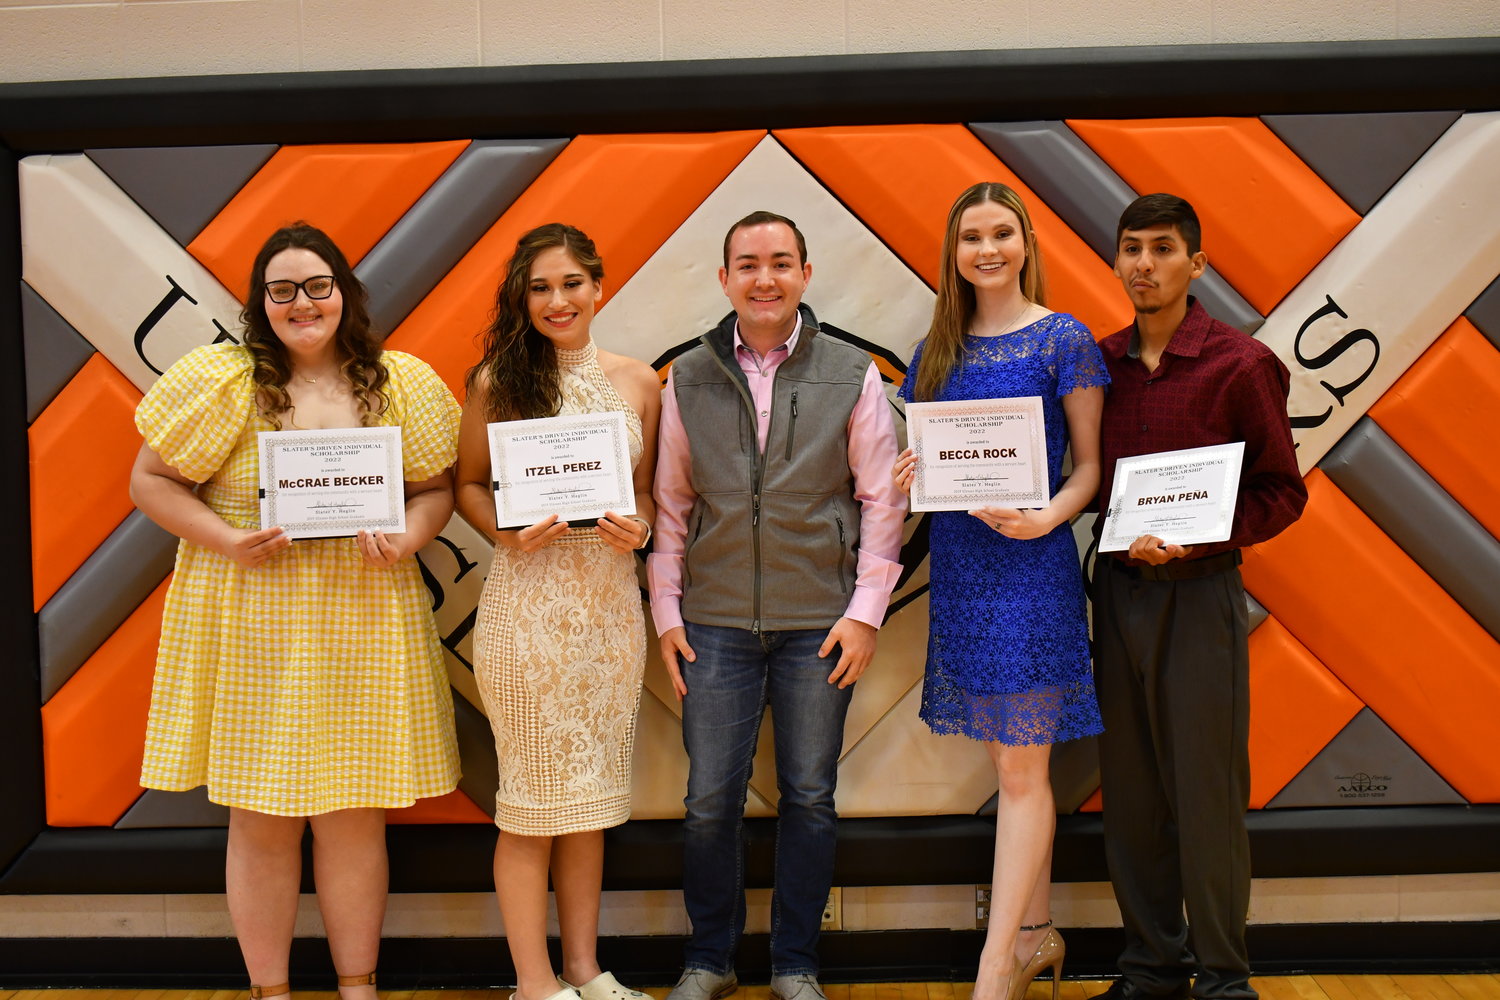 Senior Awards — McCrae Becker, Itzel Perez, Becca Rock, and Bryan Peña were given the Slater's Driven Individual Scholarship from Slater Heglin on Friday, May 13, 2022.